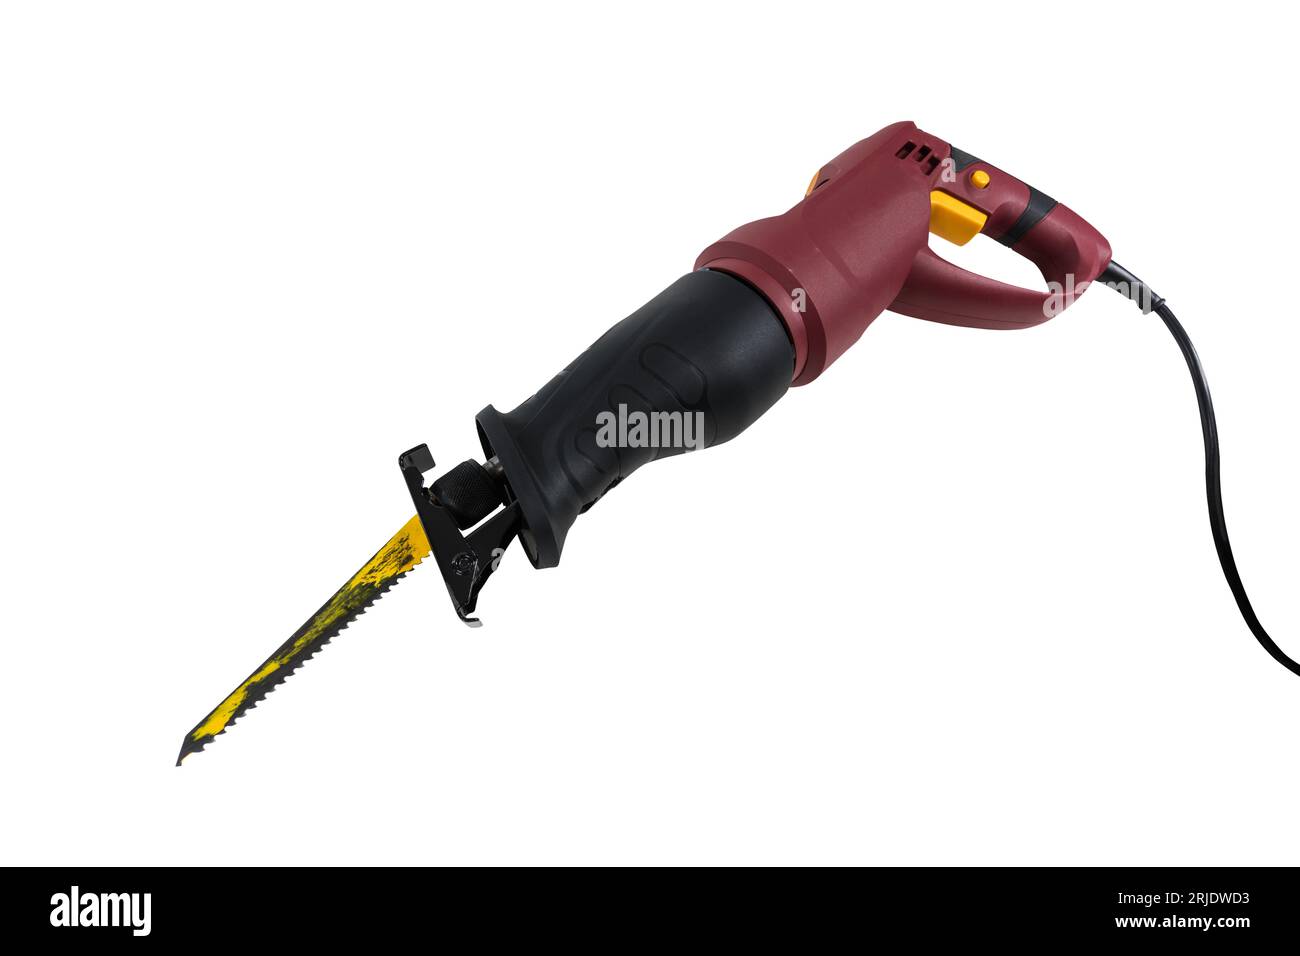 reciprocating saw isolated with cut out background. Stock Photo